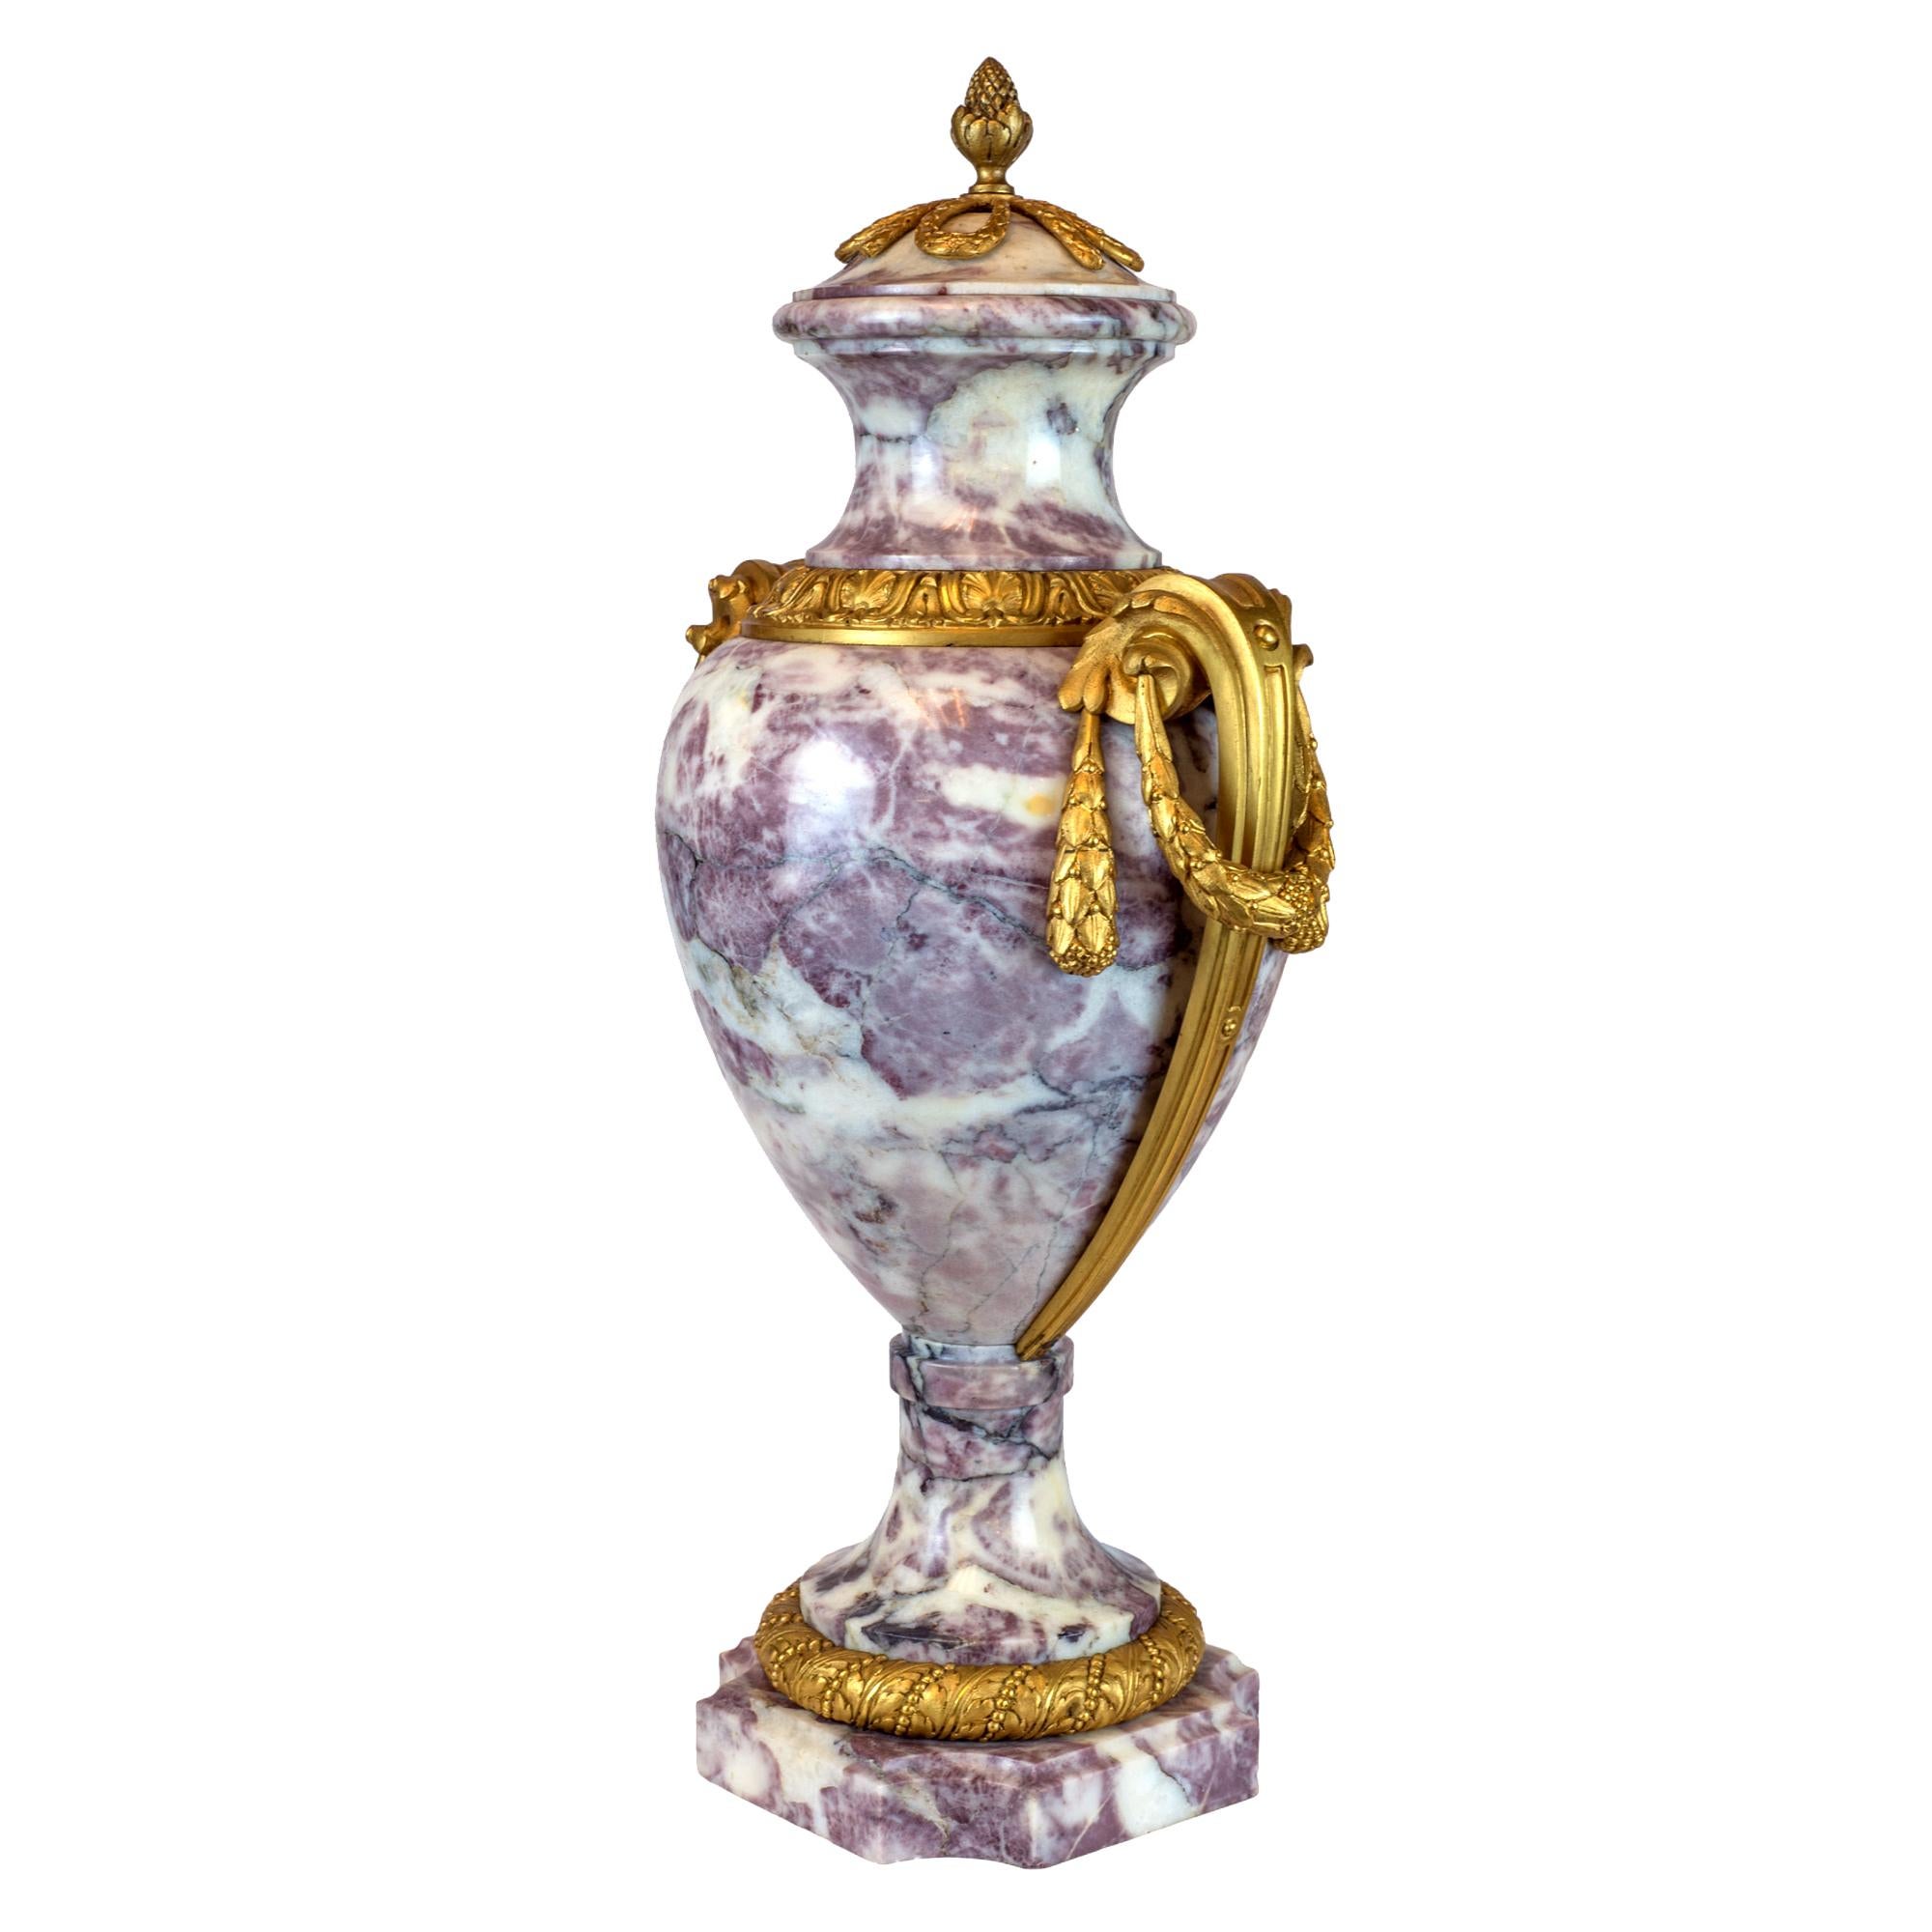 Elegant pair of ormolu-mounted brèche violette marble covered urns. Each of baluster shape. The dome cover with foliate ribbon finial with cast mounts handles and berry swags above a spreading feet. Raised on a conforming circular base and square